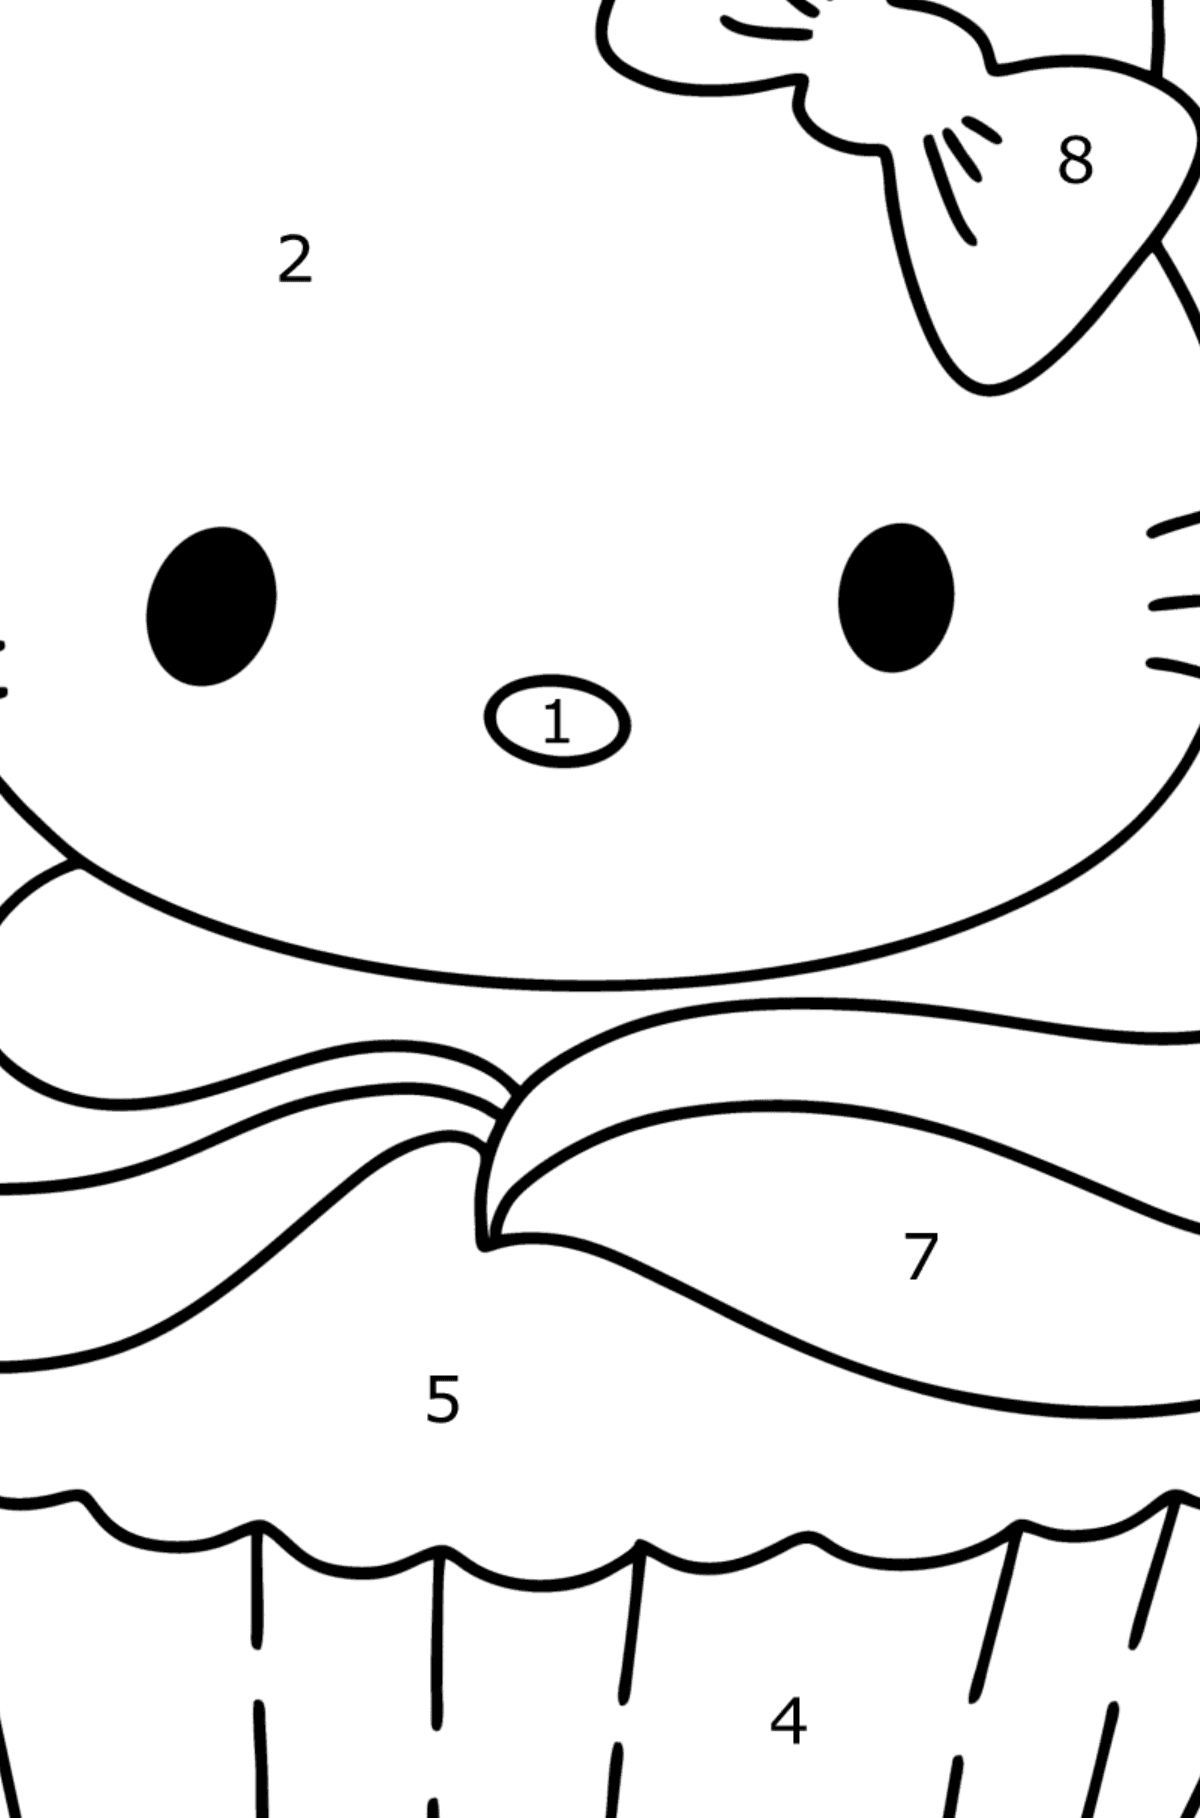 Hello Kitty cupcake coloring page - Coloring by Numbers for Kids